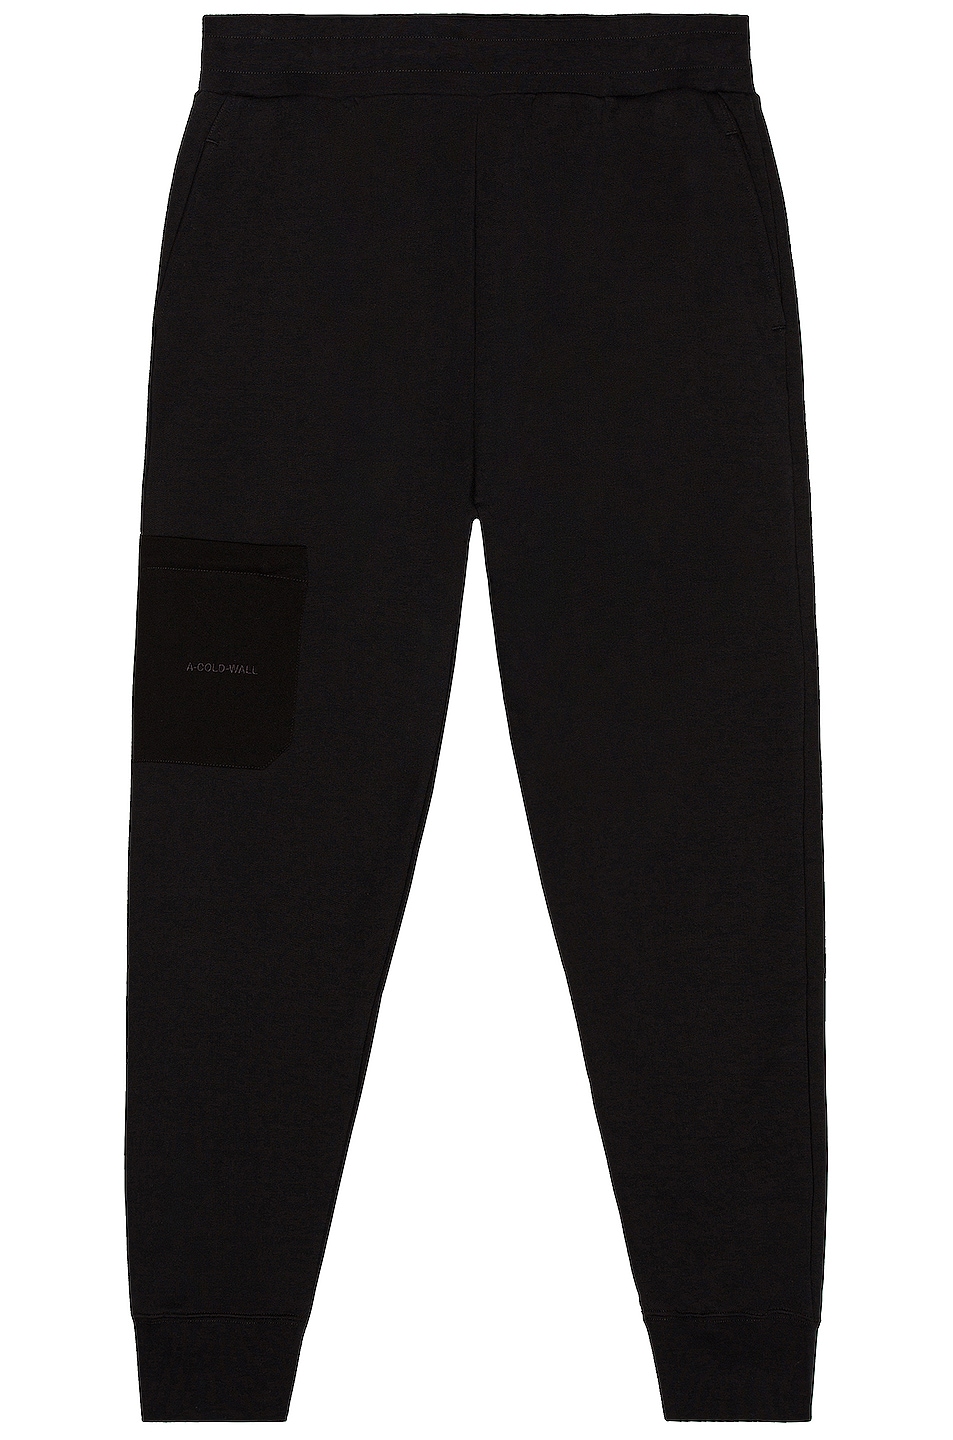 A-COLD-WALL* Logo Embroidery Sweatpant in Black | FWRD